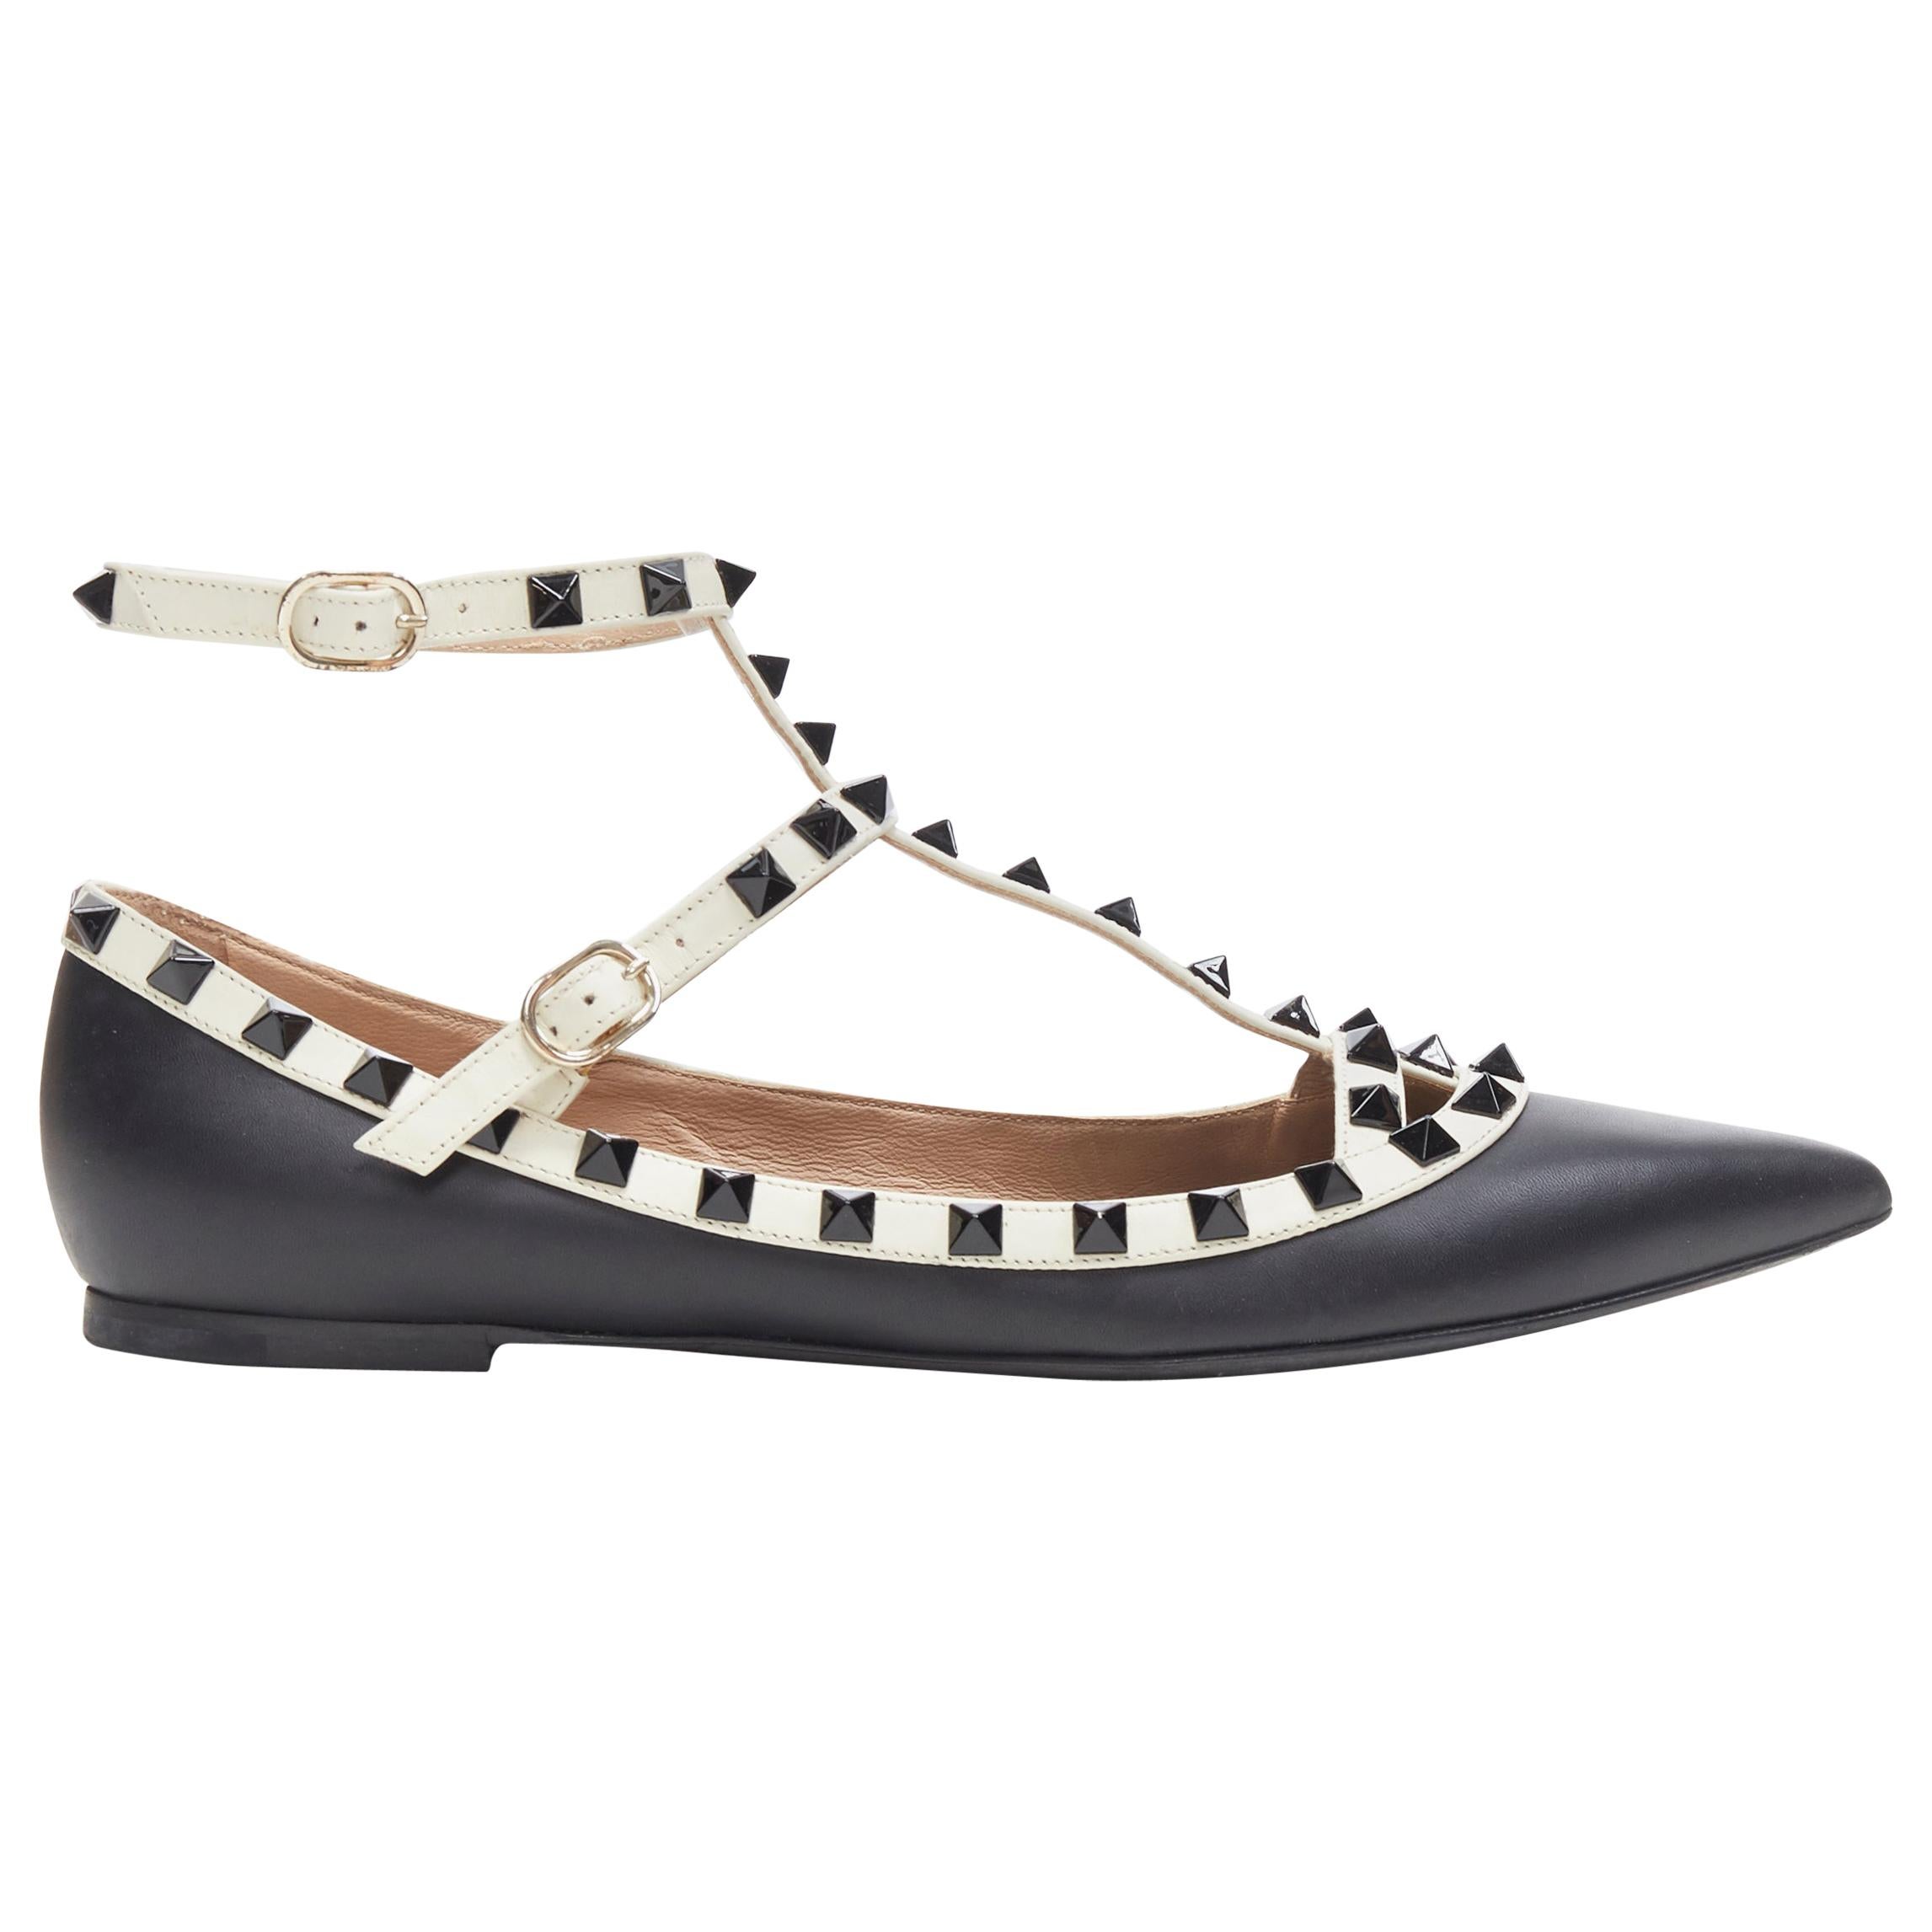 VALENTINO Rockstud black white studded caged strappy pointed flat shoes EU38.5